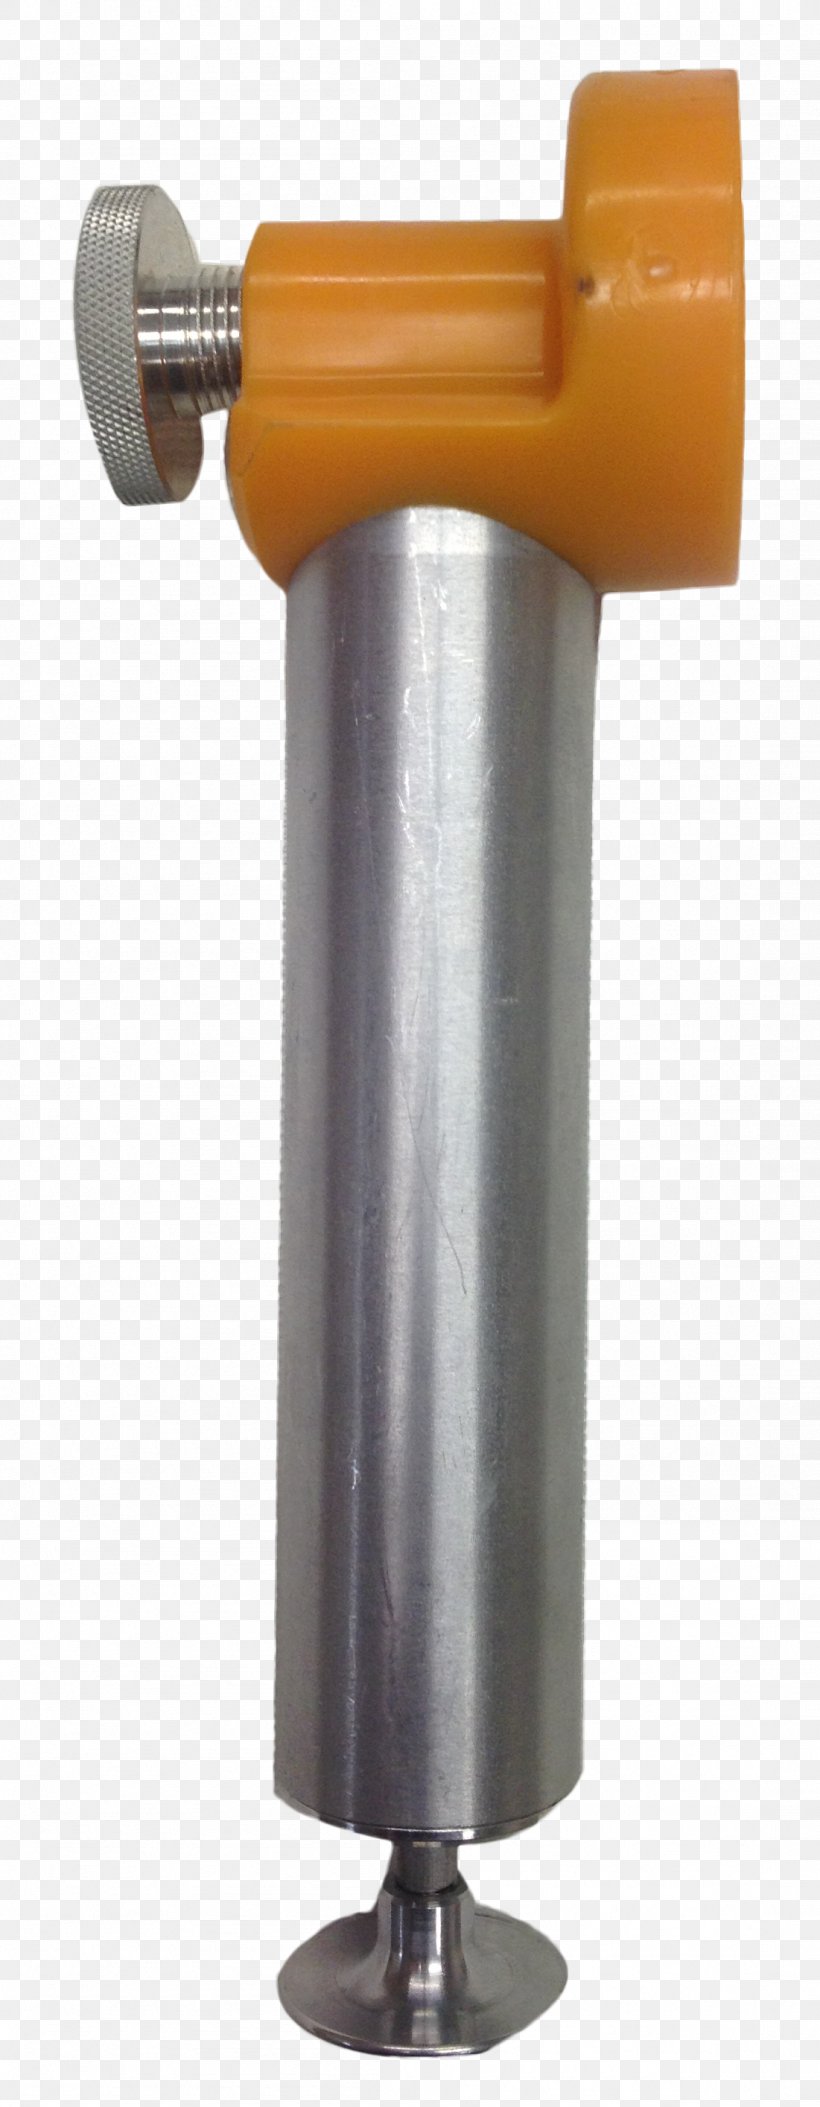 Angle Cylinder, PNG, 1101x2830px, Cylinder, Hardware Download Free